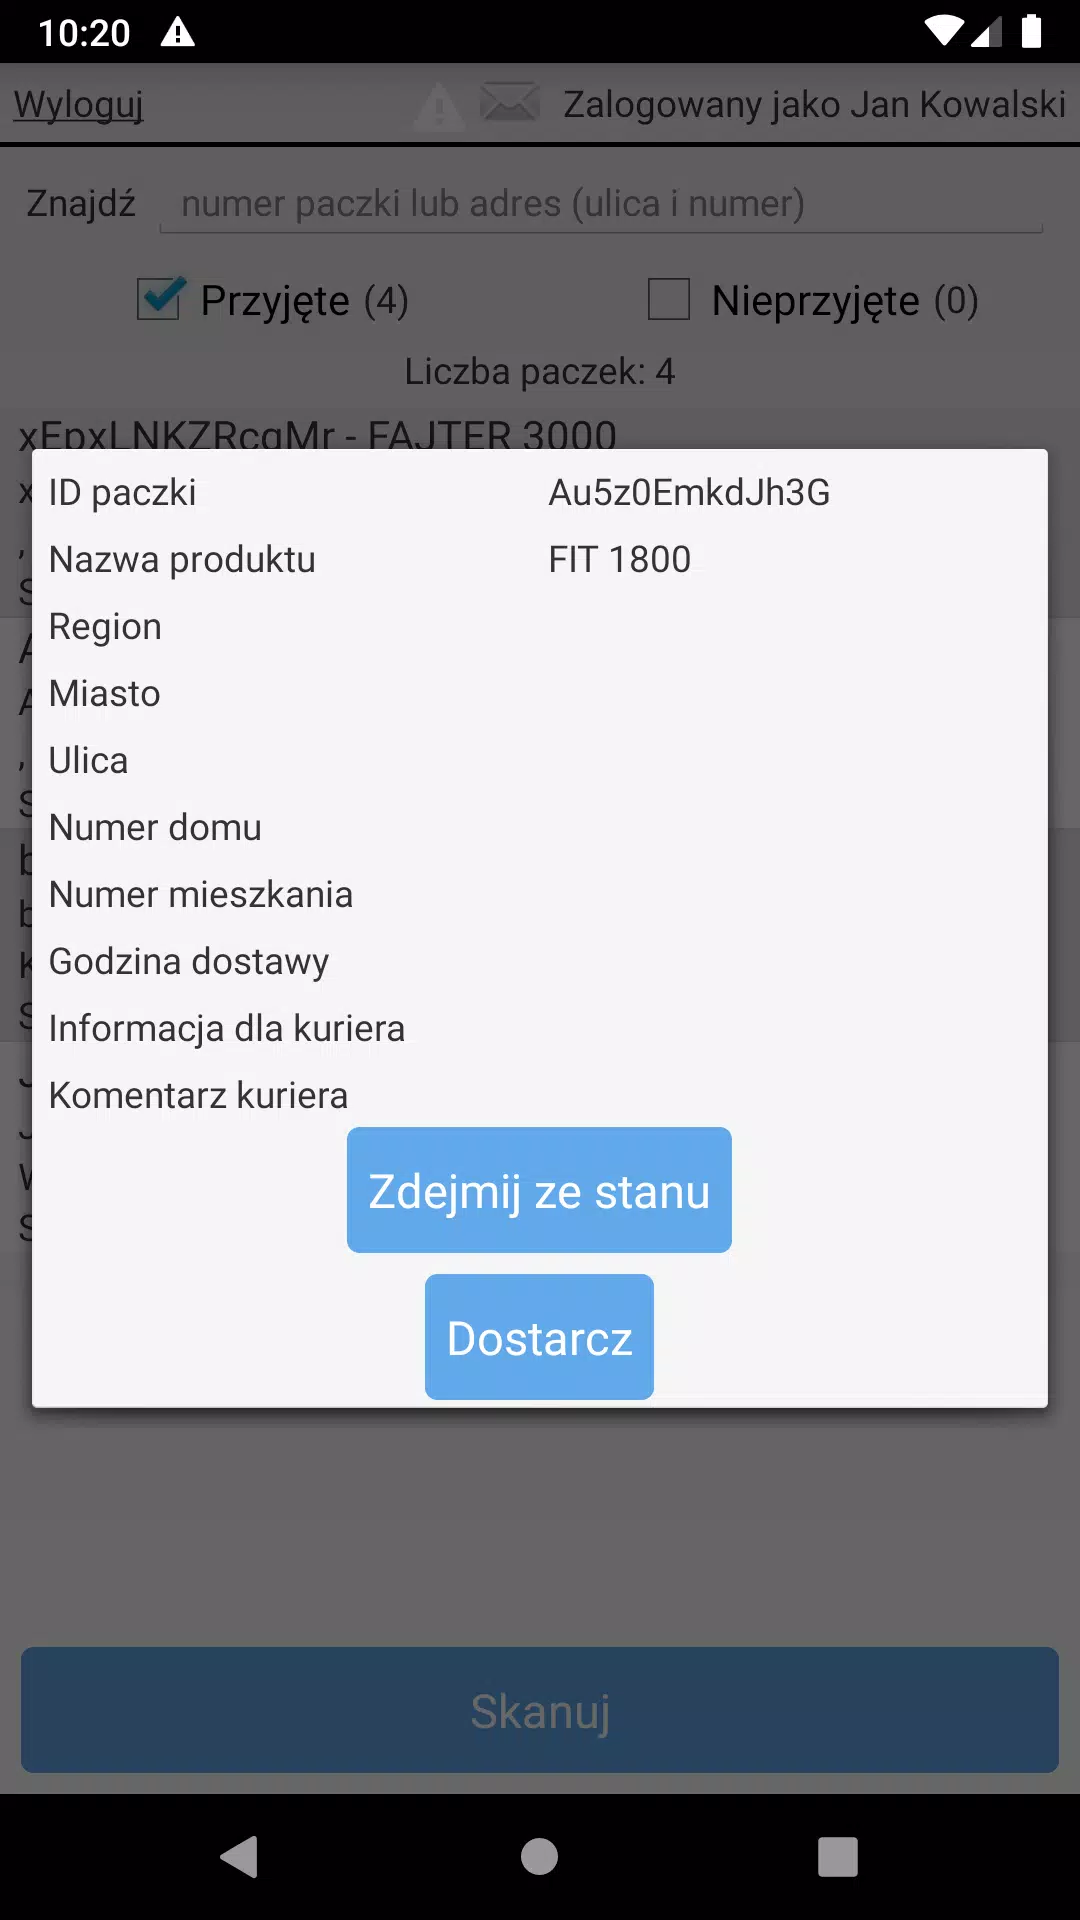 MaczDostawca for Android - APK Download